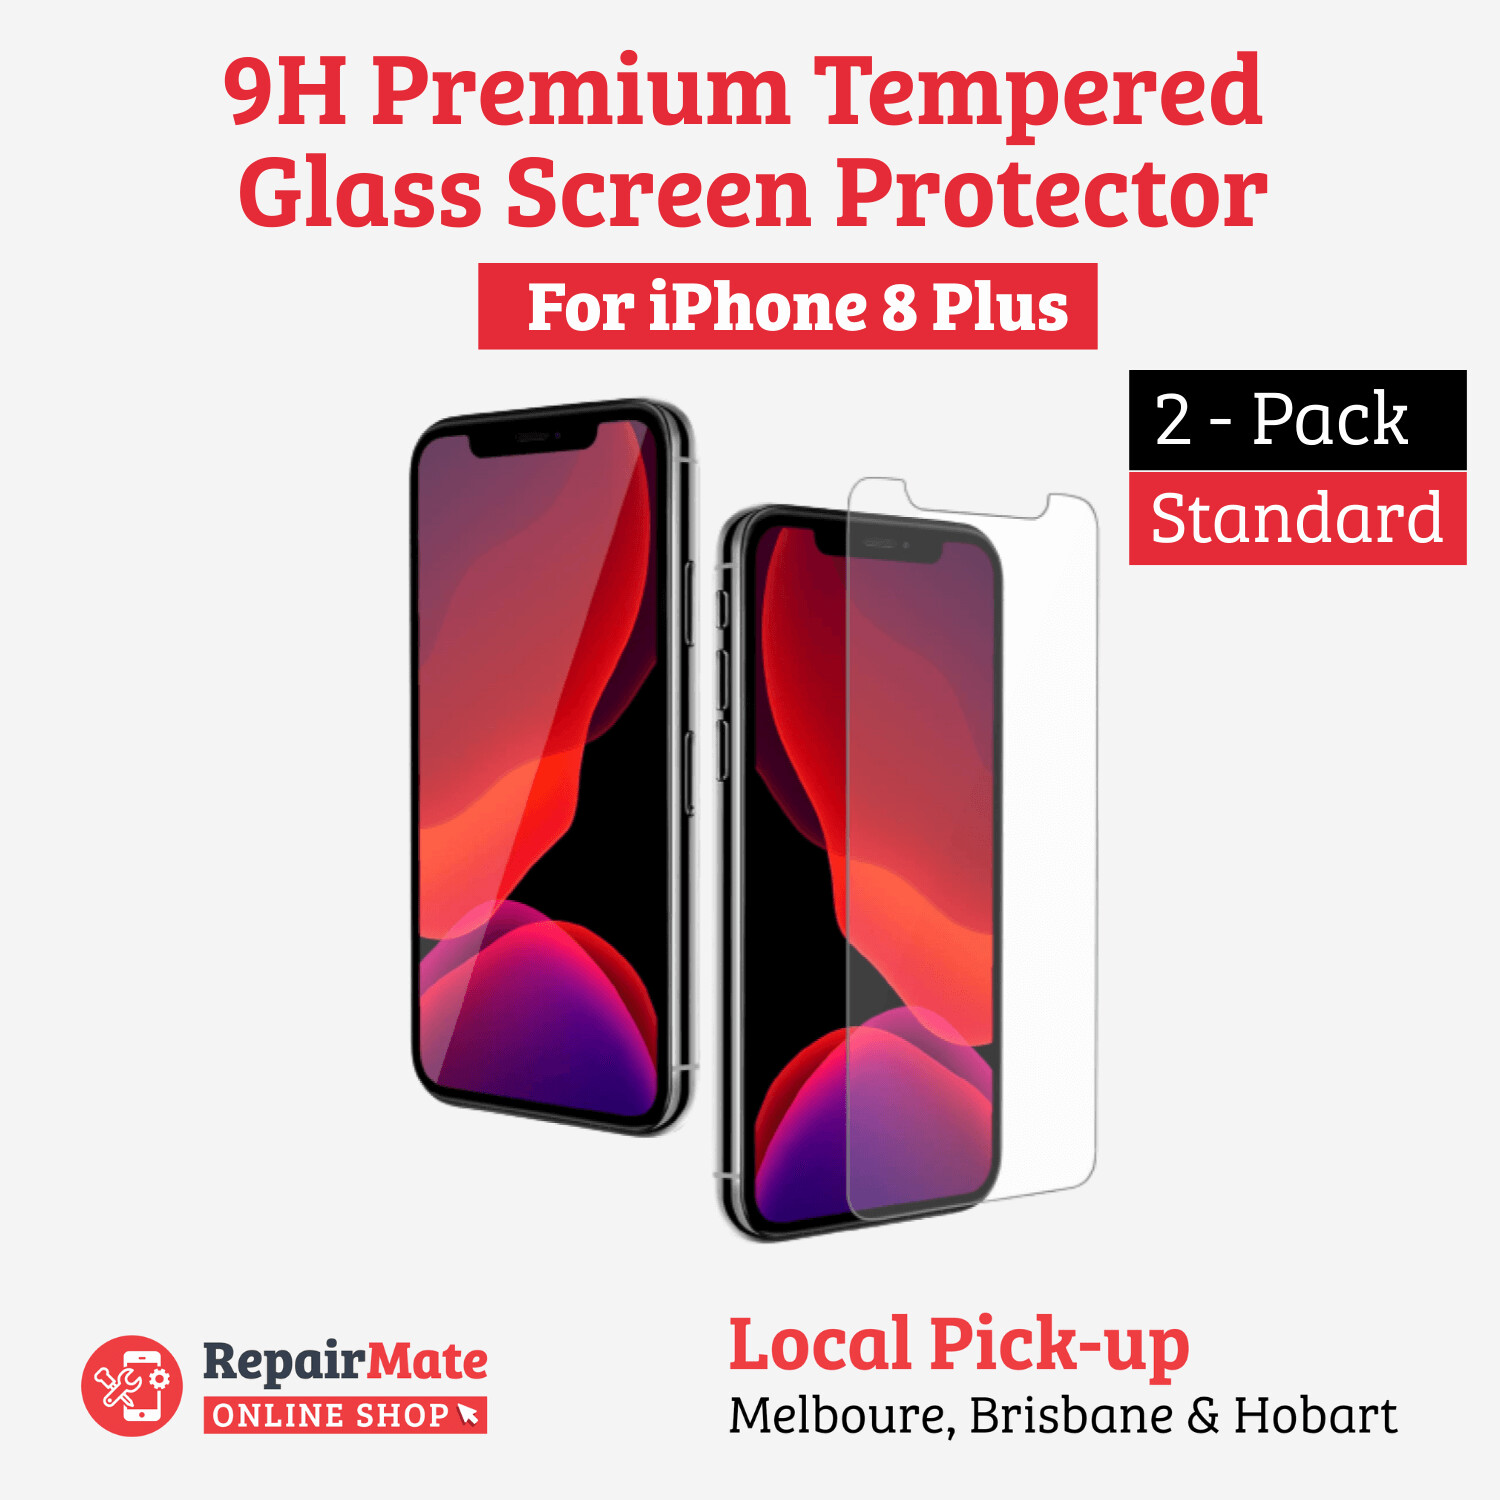 iPhone 8 Plus 9H Premium Tempered Glass Screen Protector [2 Pack]